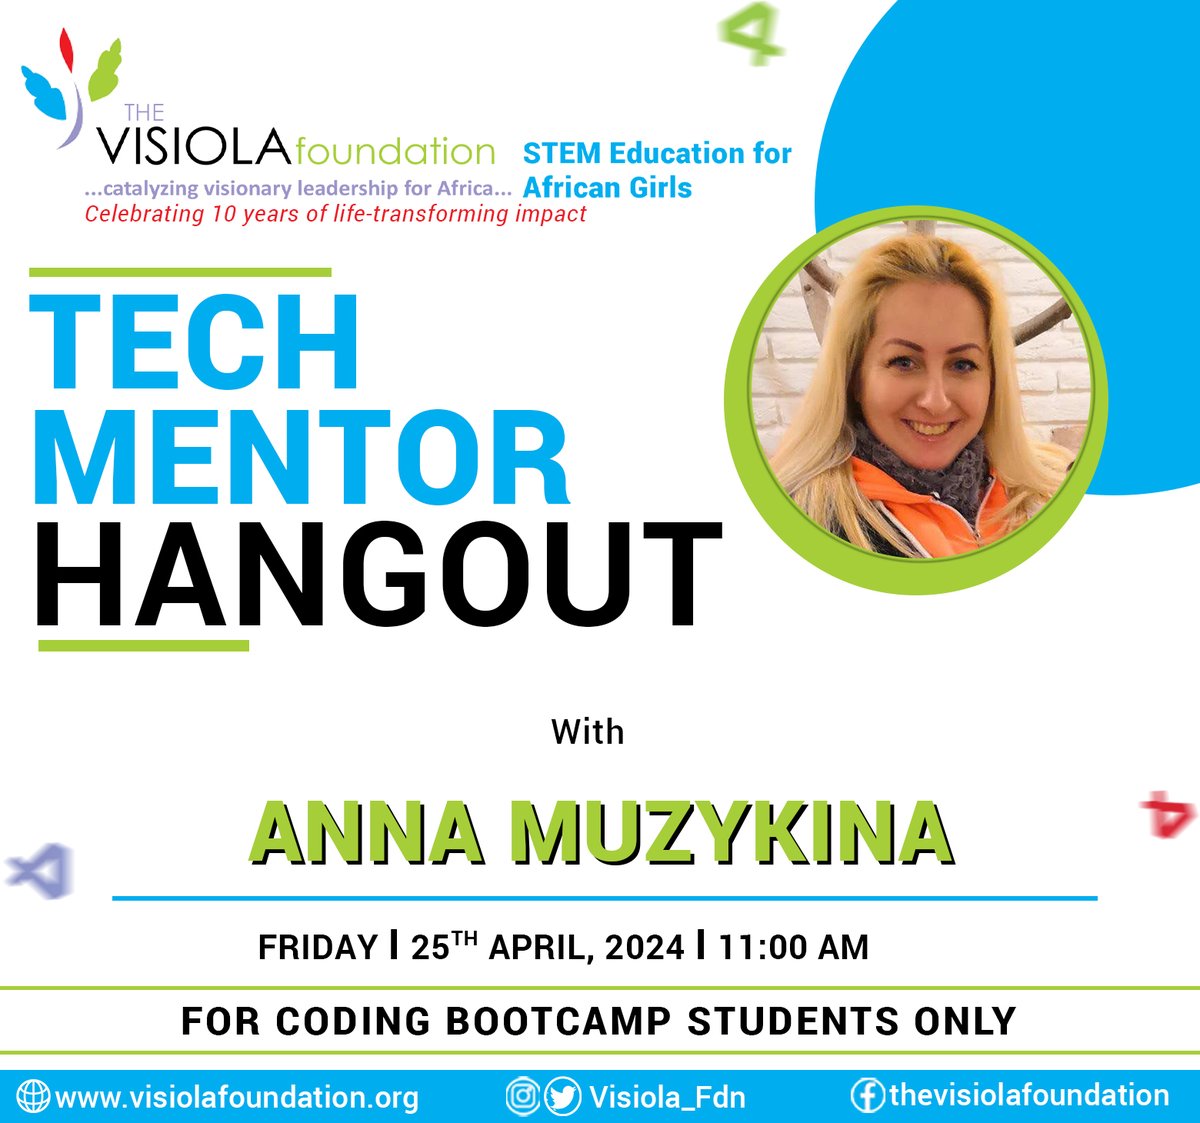 🚀 We are excited to host a Tech Mentor Hangout with Anna Muzykina this Friday, April 25th, at 11:00 am (WAT)! Exclusive for #VisiolaCodingBootcamp students, focusing on #FullstackWebDevelopment. #WomenInTech